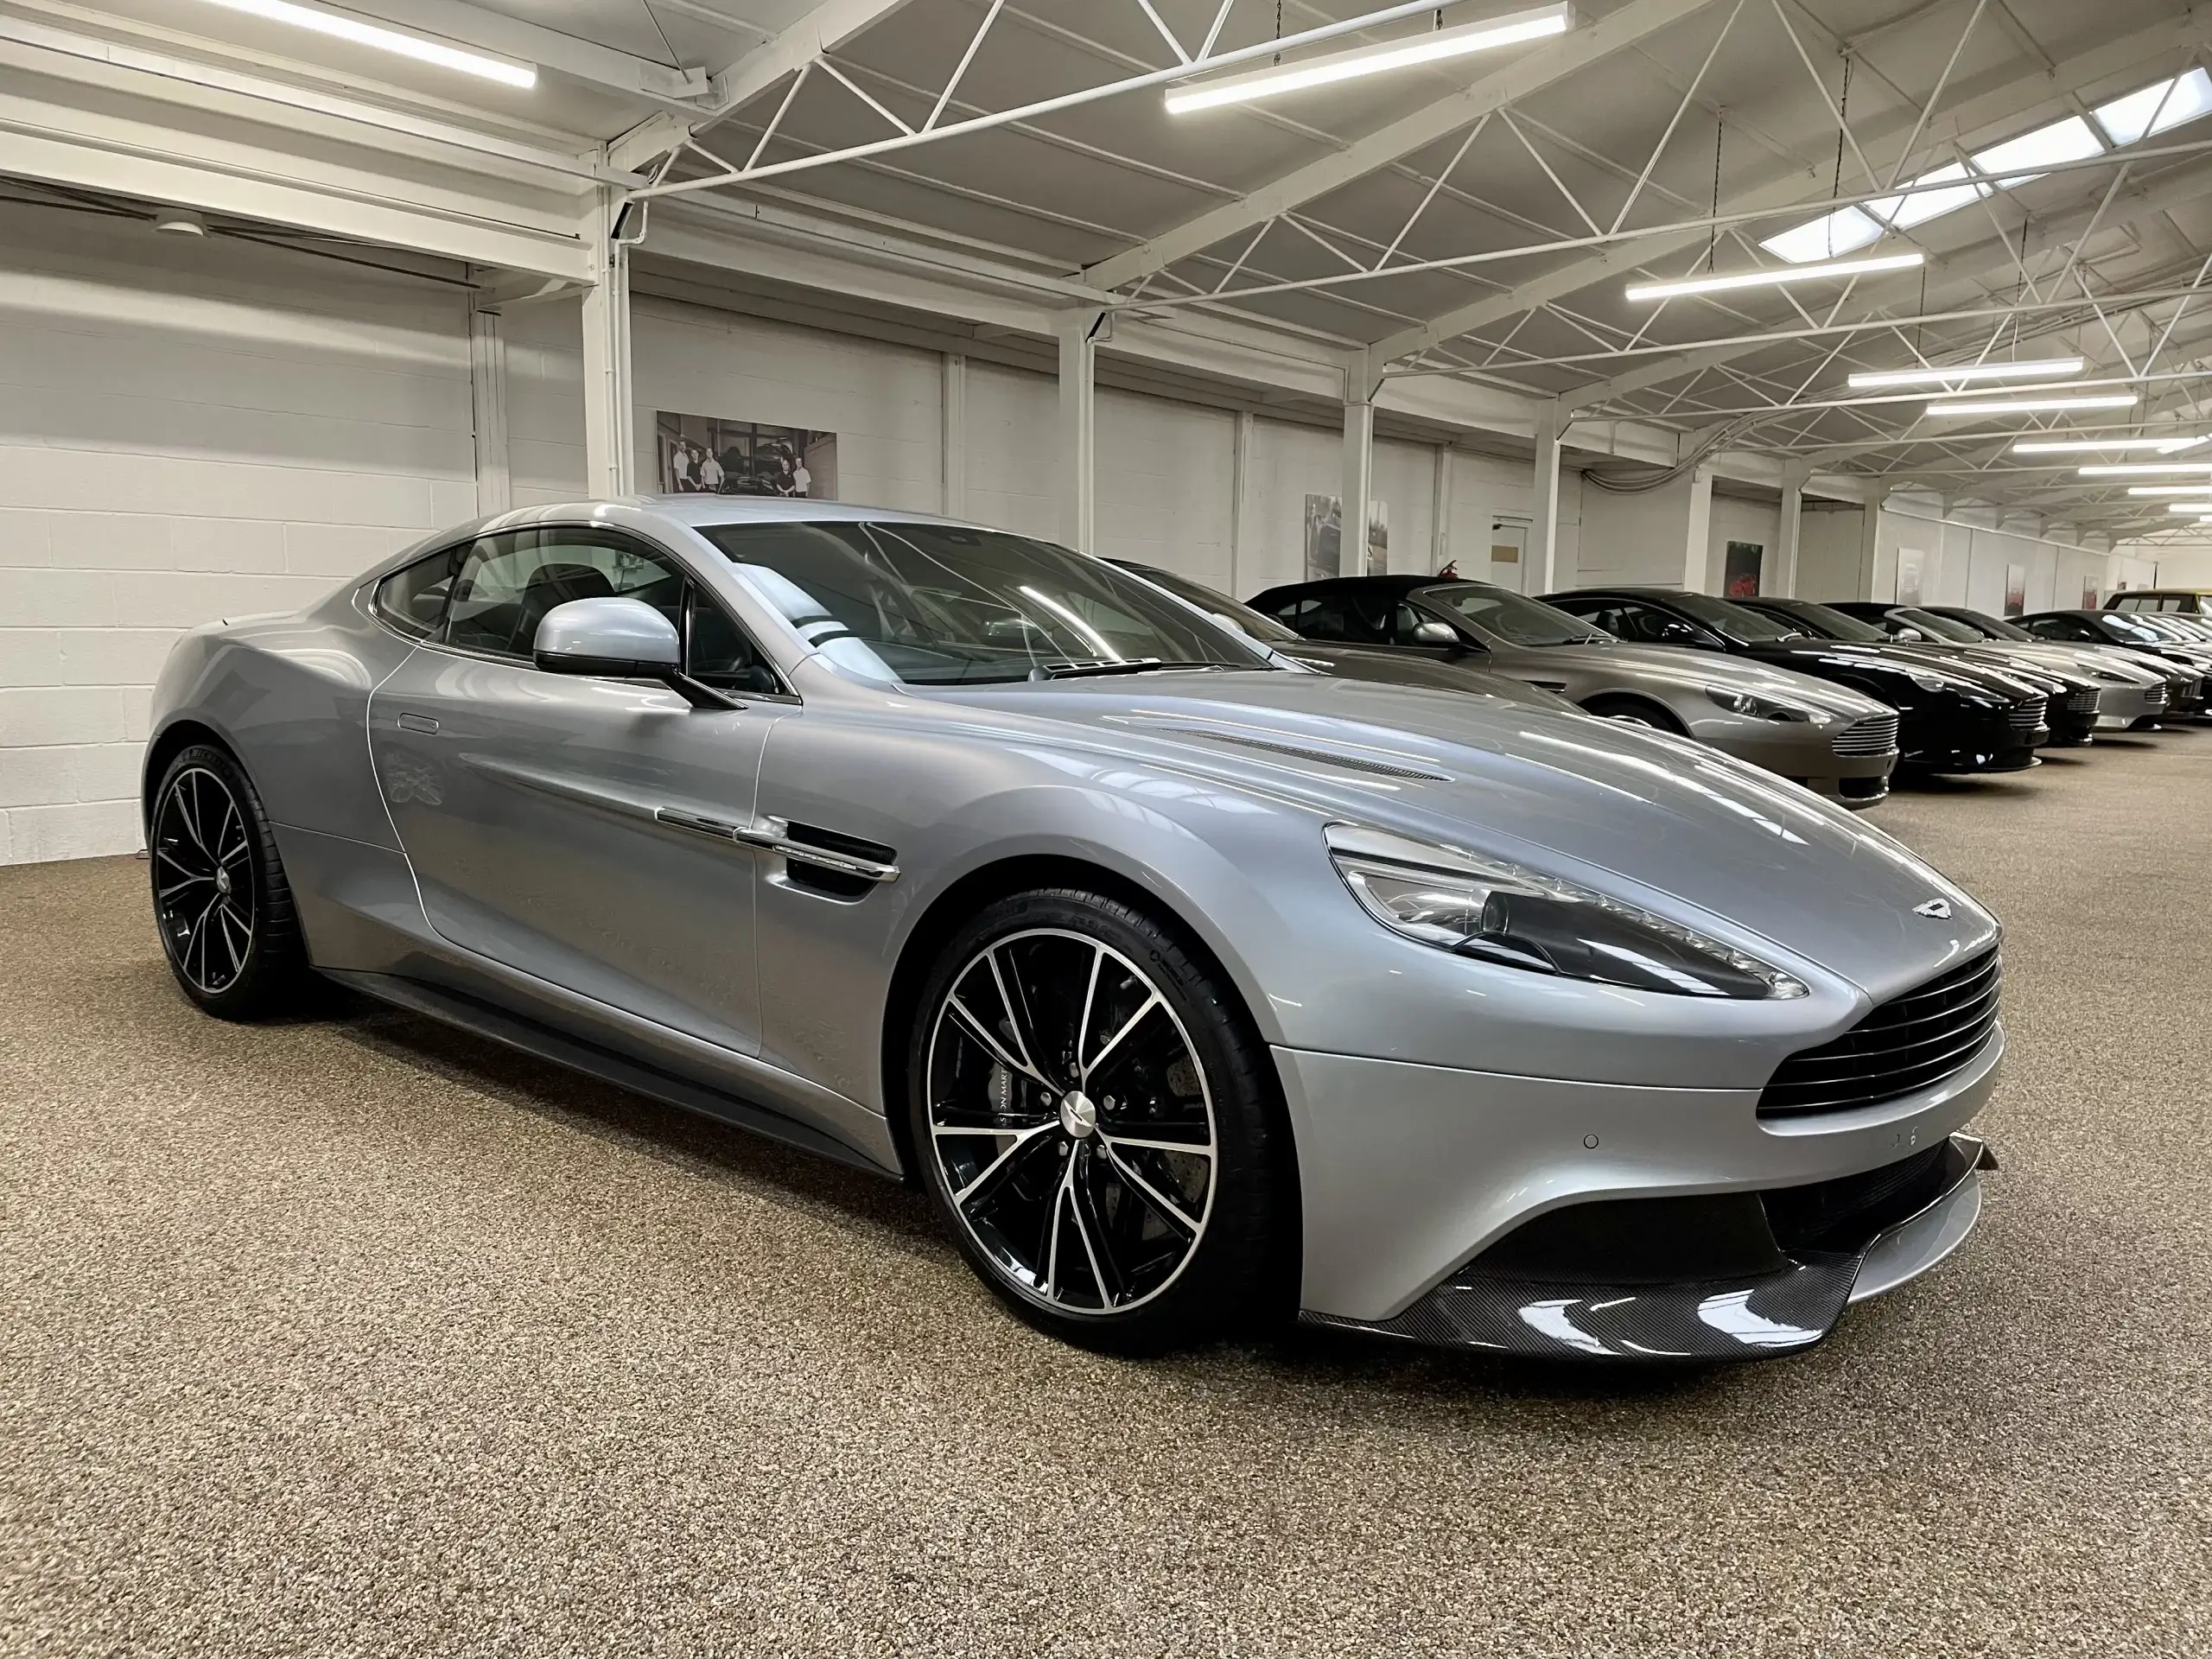 Used Vanquish for sale